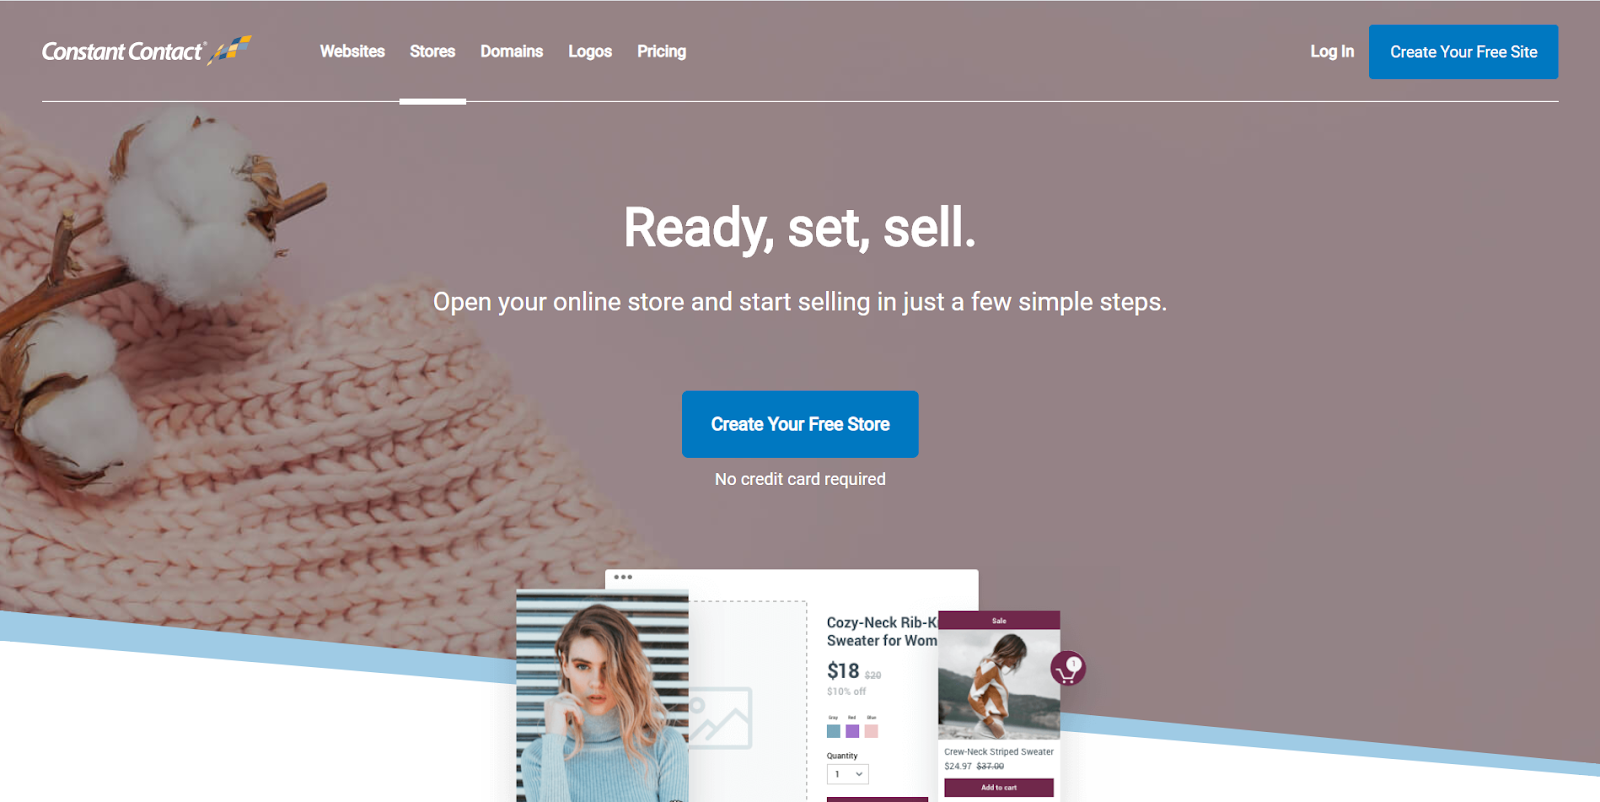 Constant Contact's website builder online store starting page